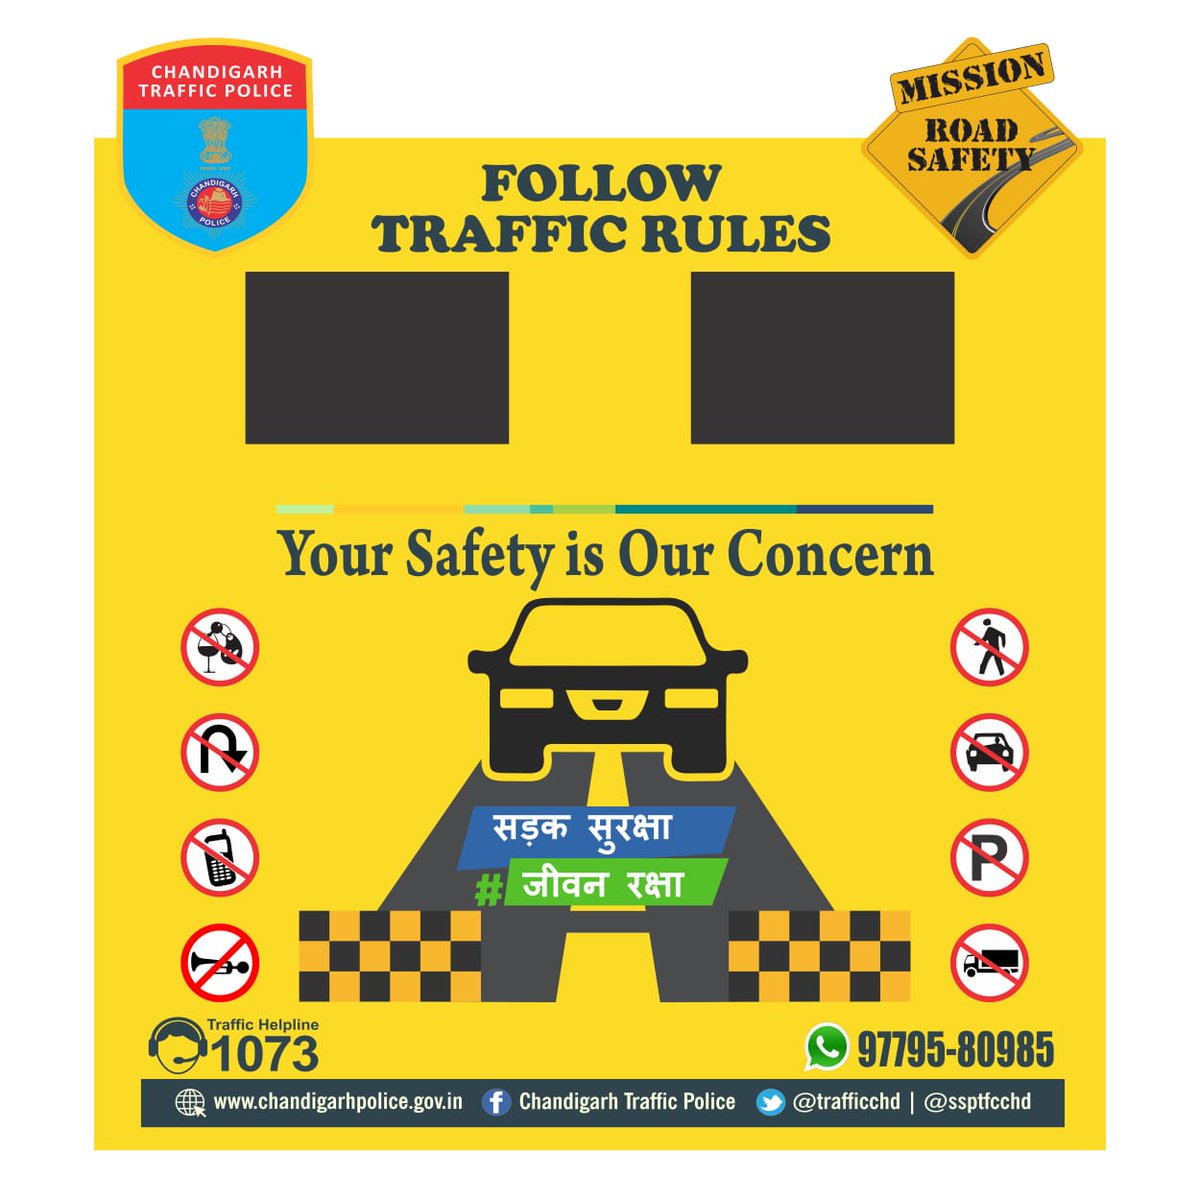 Safety is everybody’s responsibility, especially yours!!
If you’re not safety conscious, you could end up unconscious.
SO THINK ABOUT SAFETY OF ALL!
#RoadSafety #GoldenRule #savefuture #safetyfirst #staysafe
#WeCareForYou